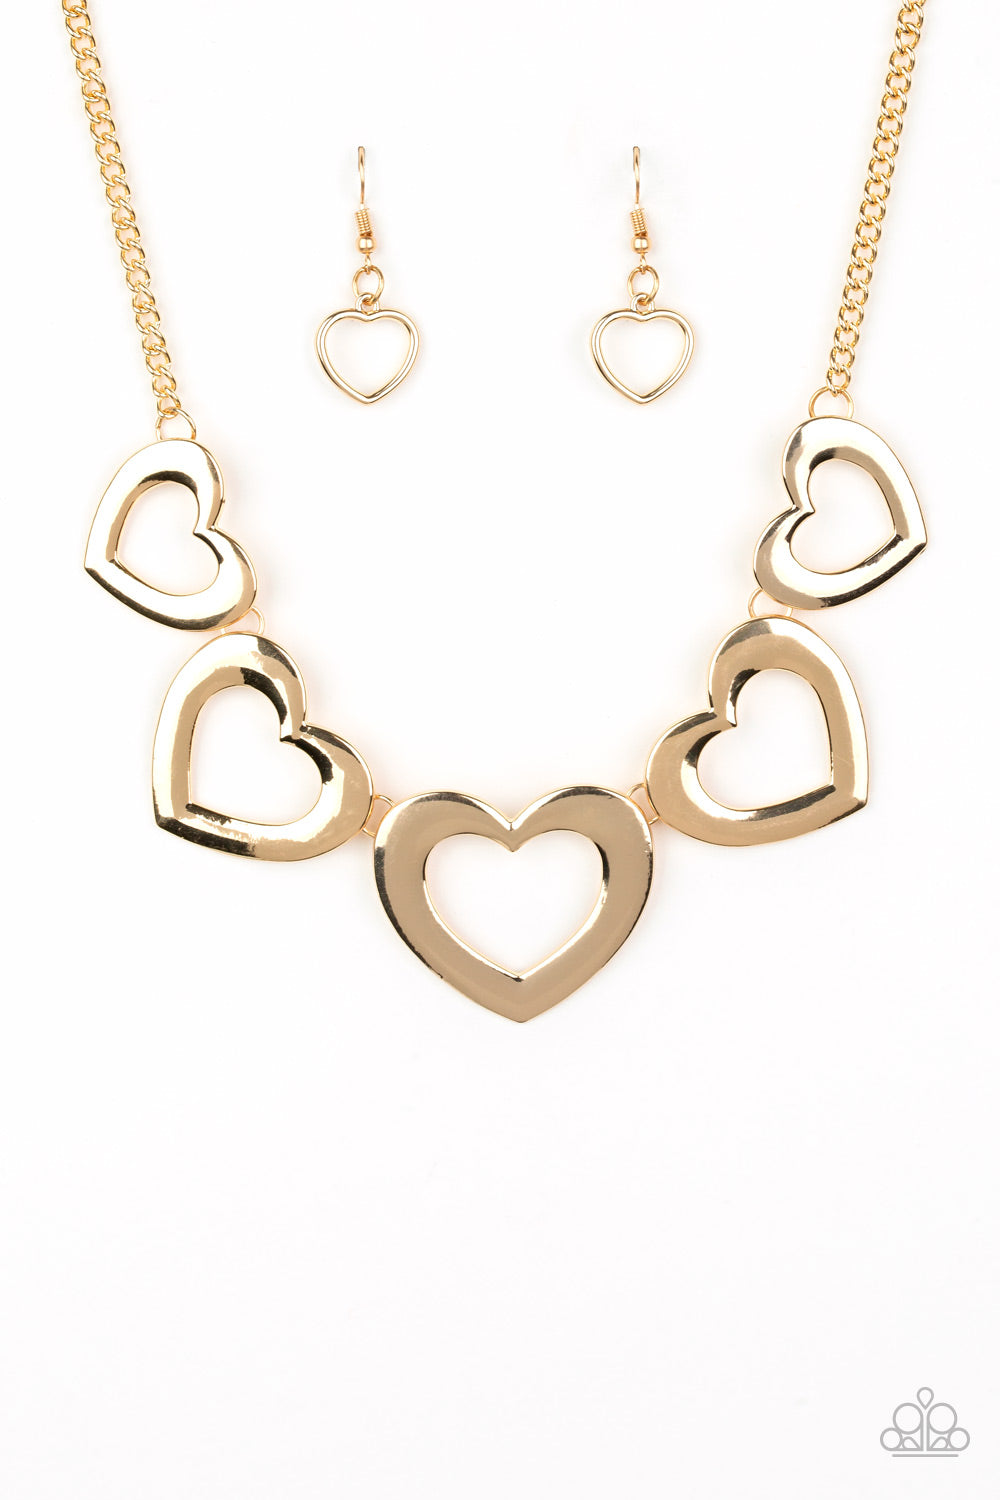 Hearty Hearts Gold Paparazzi Necklaces Cashmere Pink Jewels - Cashmere Pink Jewels & Accessories, Cashmere Pink Jewels & Accessories - Paparazzi